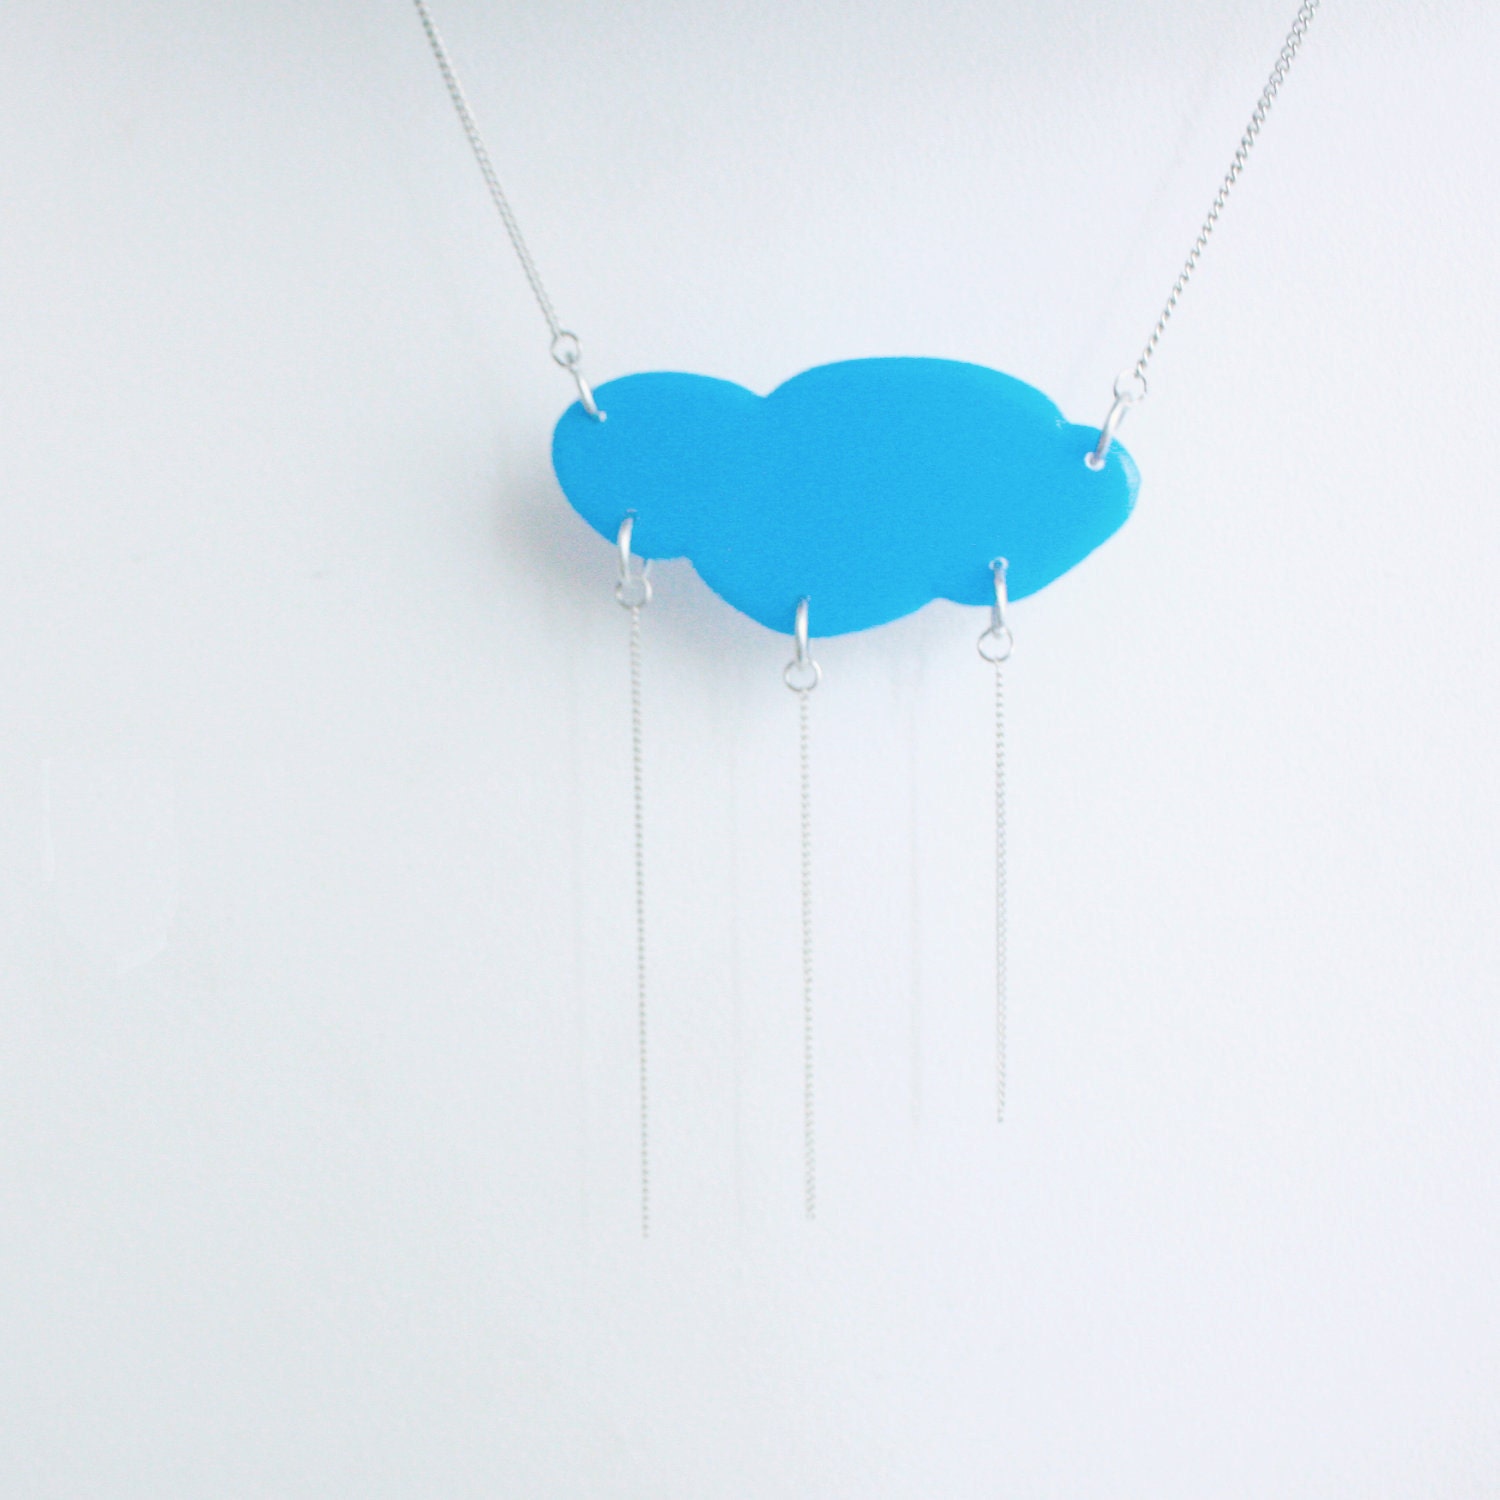 Blue Sky cloud statement neclace - Acrylic and silver plated metal - HelenaRibeiro